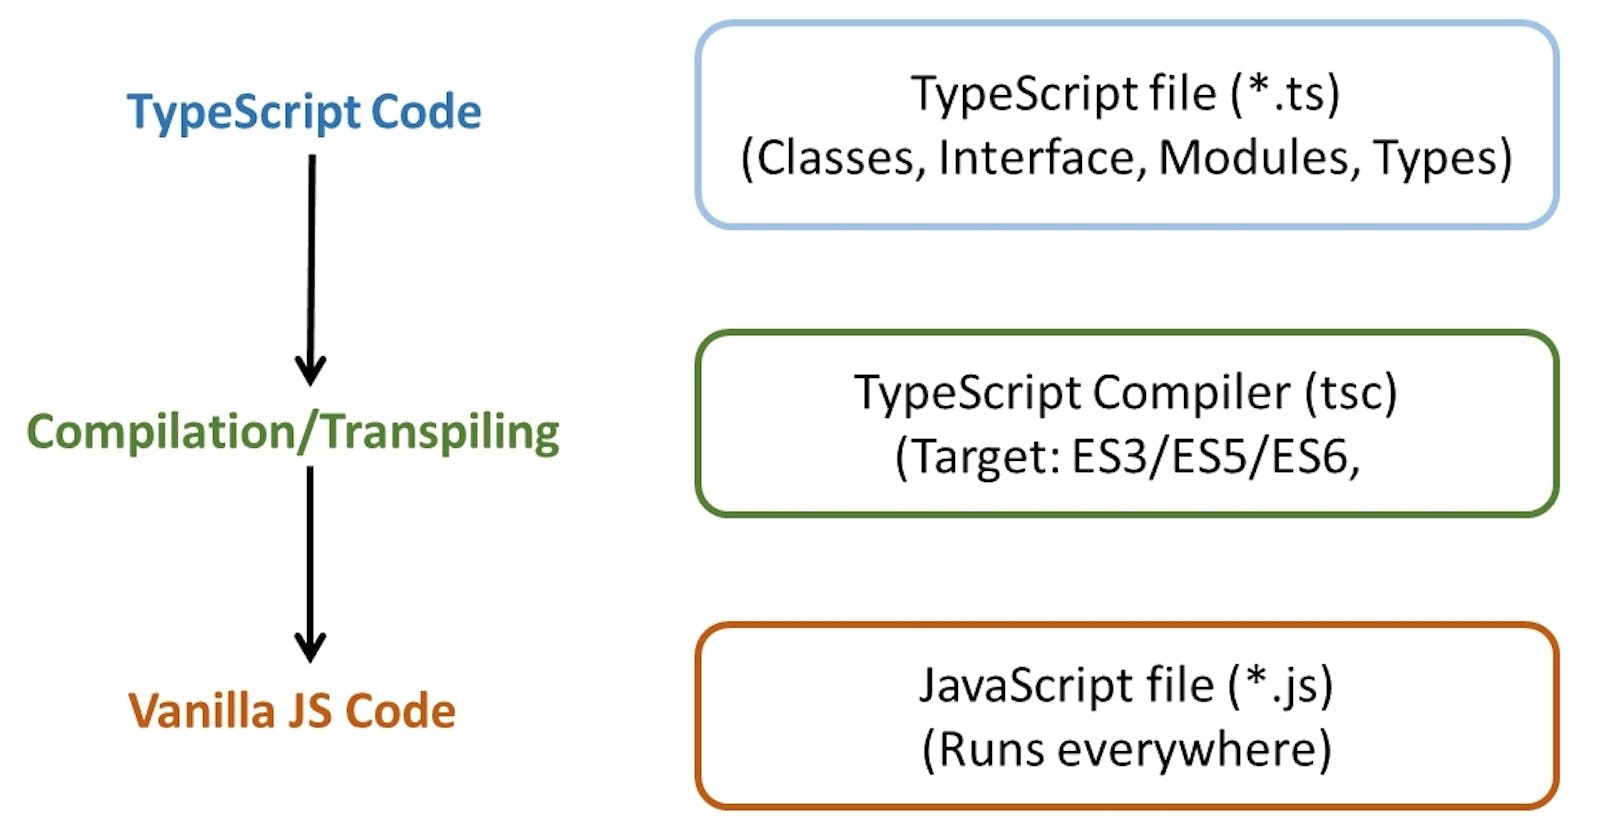 Cover Image for This is a JavaScript world! 5 Languages that compile to JS